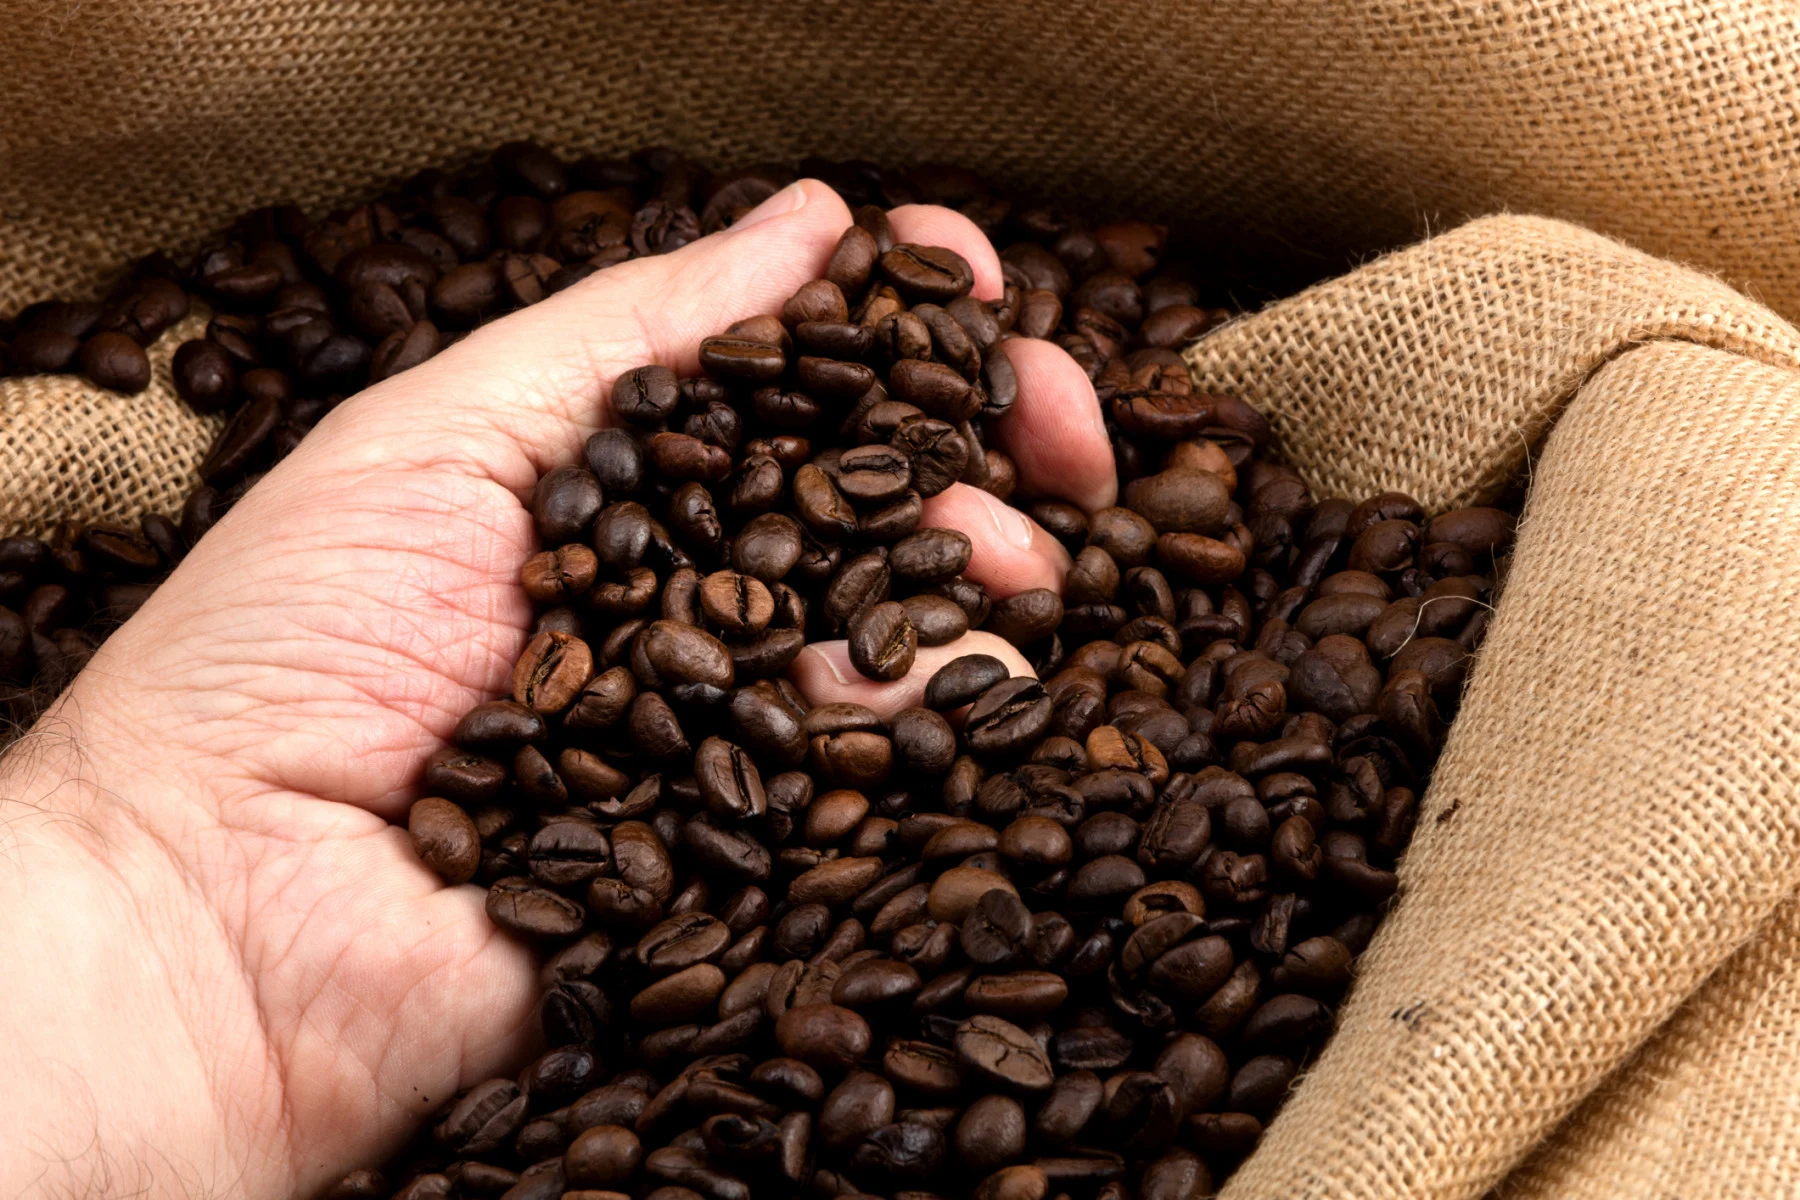 Growing regions for coffee, cashews, and avocados will shift, study predicts